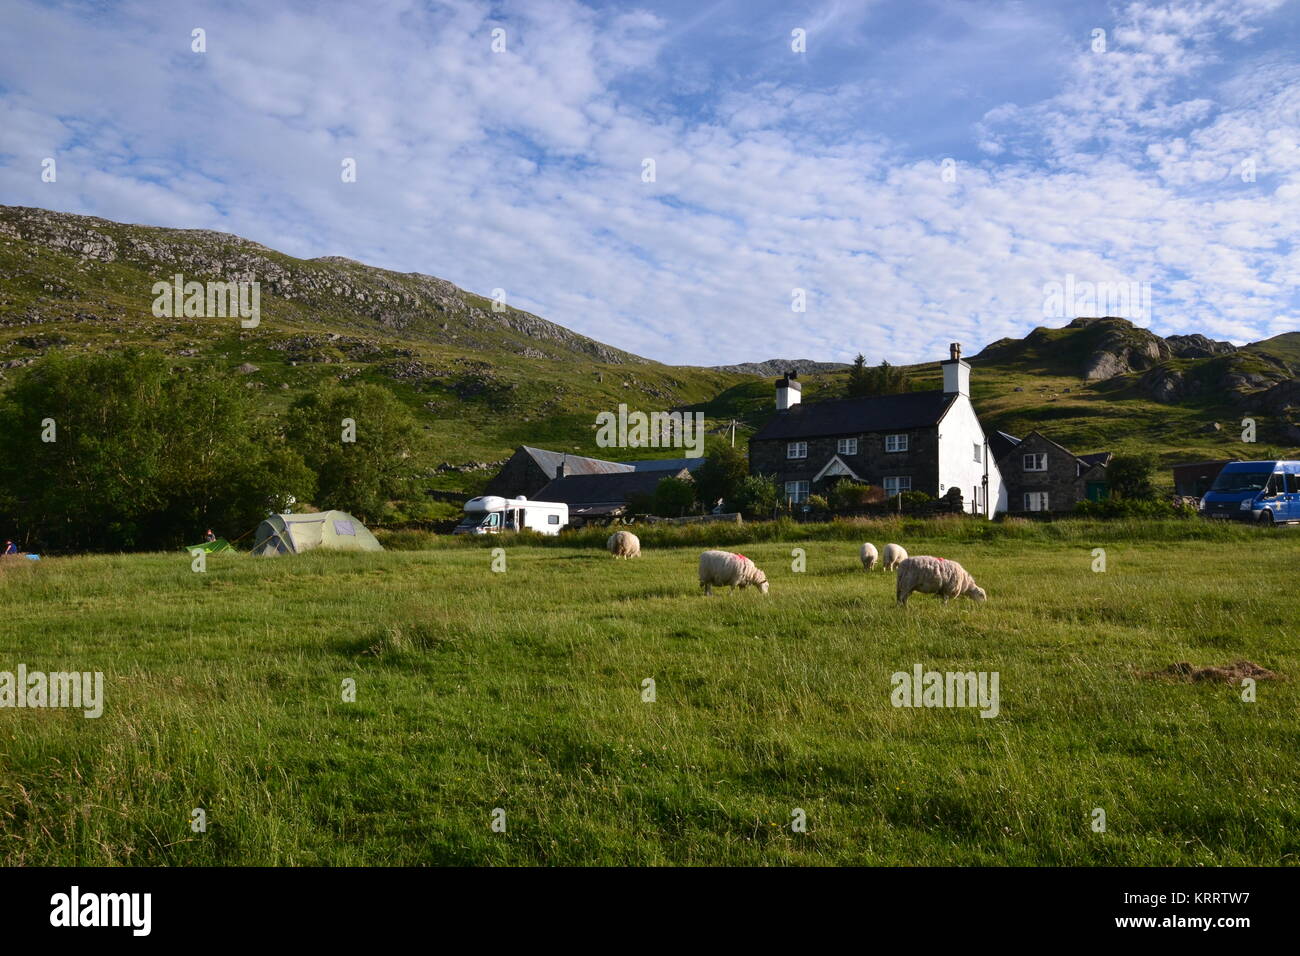 Sheep, tents and motorhome at Gwern Gof Usif Campsite at the foot of Mount Tryfan, Snowdonia, Wales, UK Stock Photo